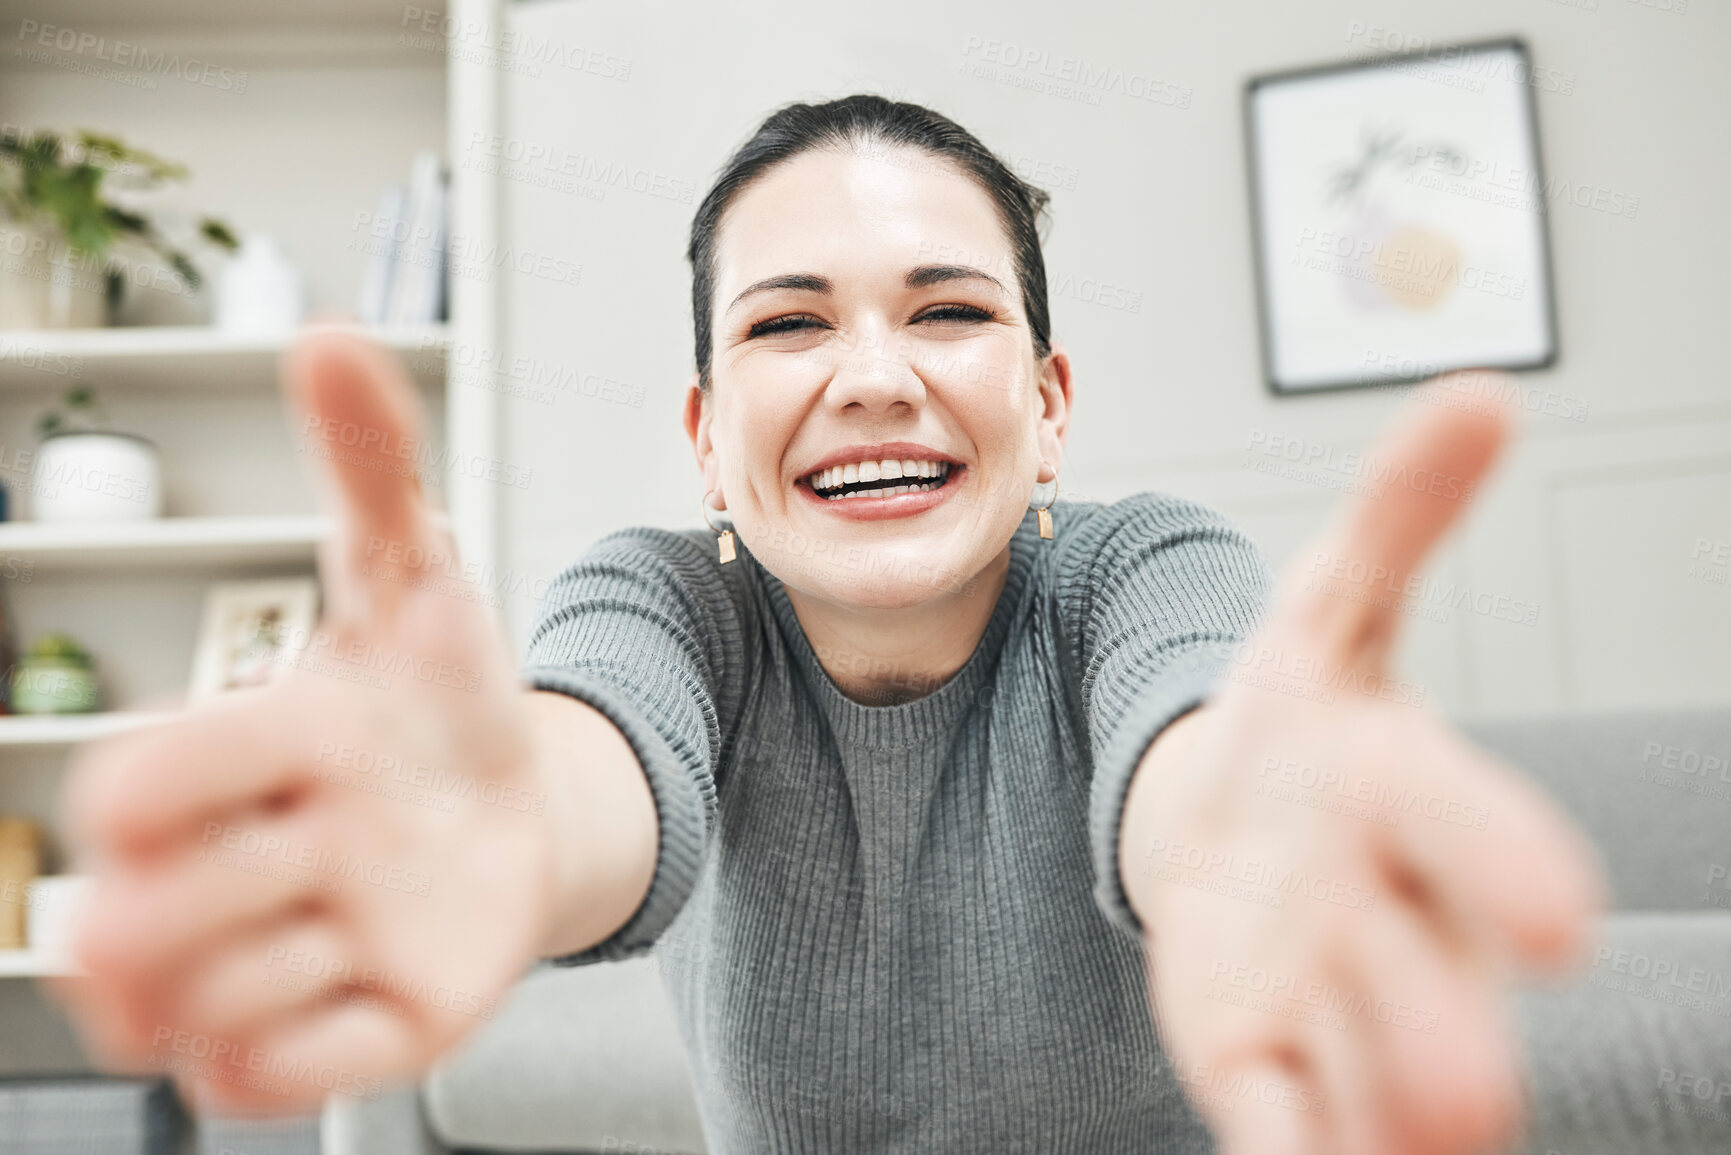 Buy stock photo Happy, smiling and laughing woman reaching out her arms for a hug, embrace or holding while relaxing alone at home. Portrait of a relaxed, content and cheerful female giving embrace and being playful